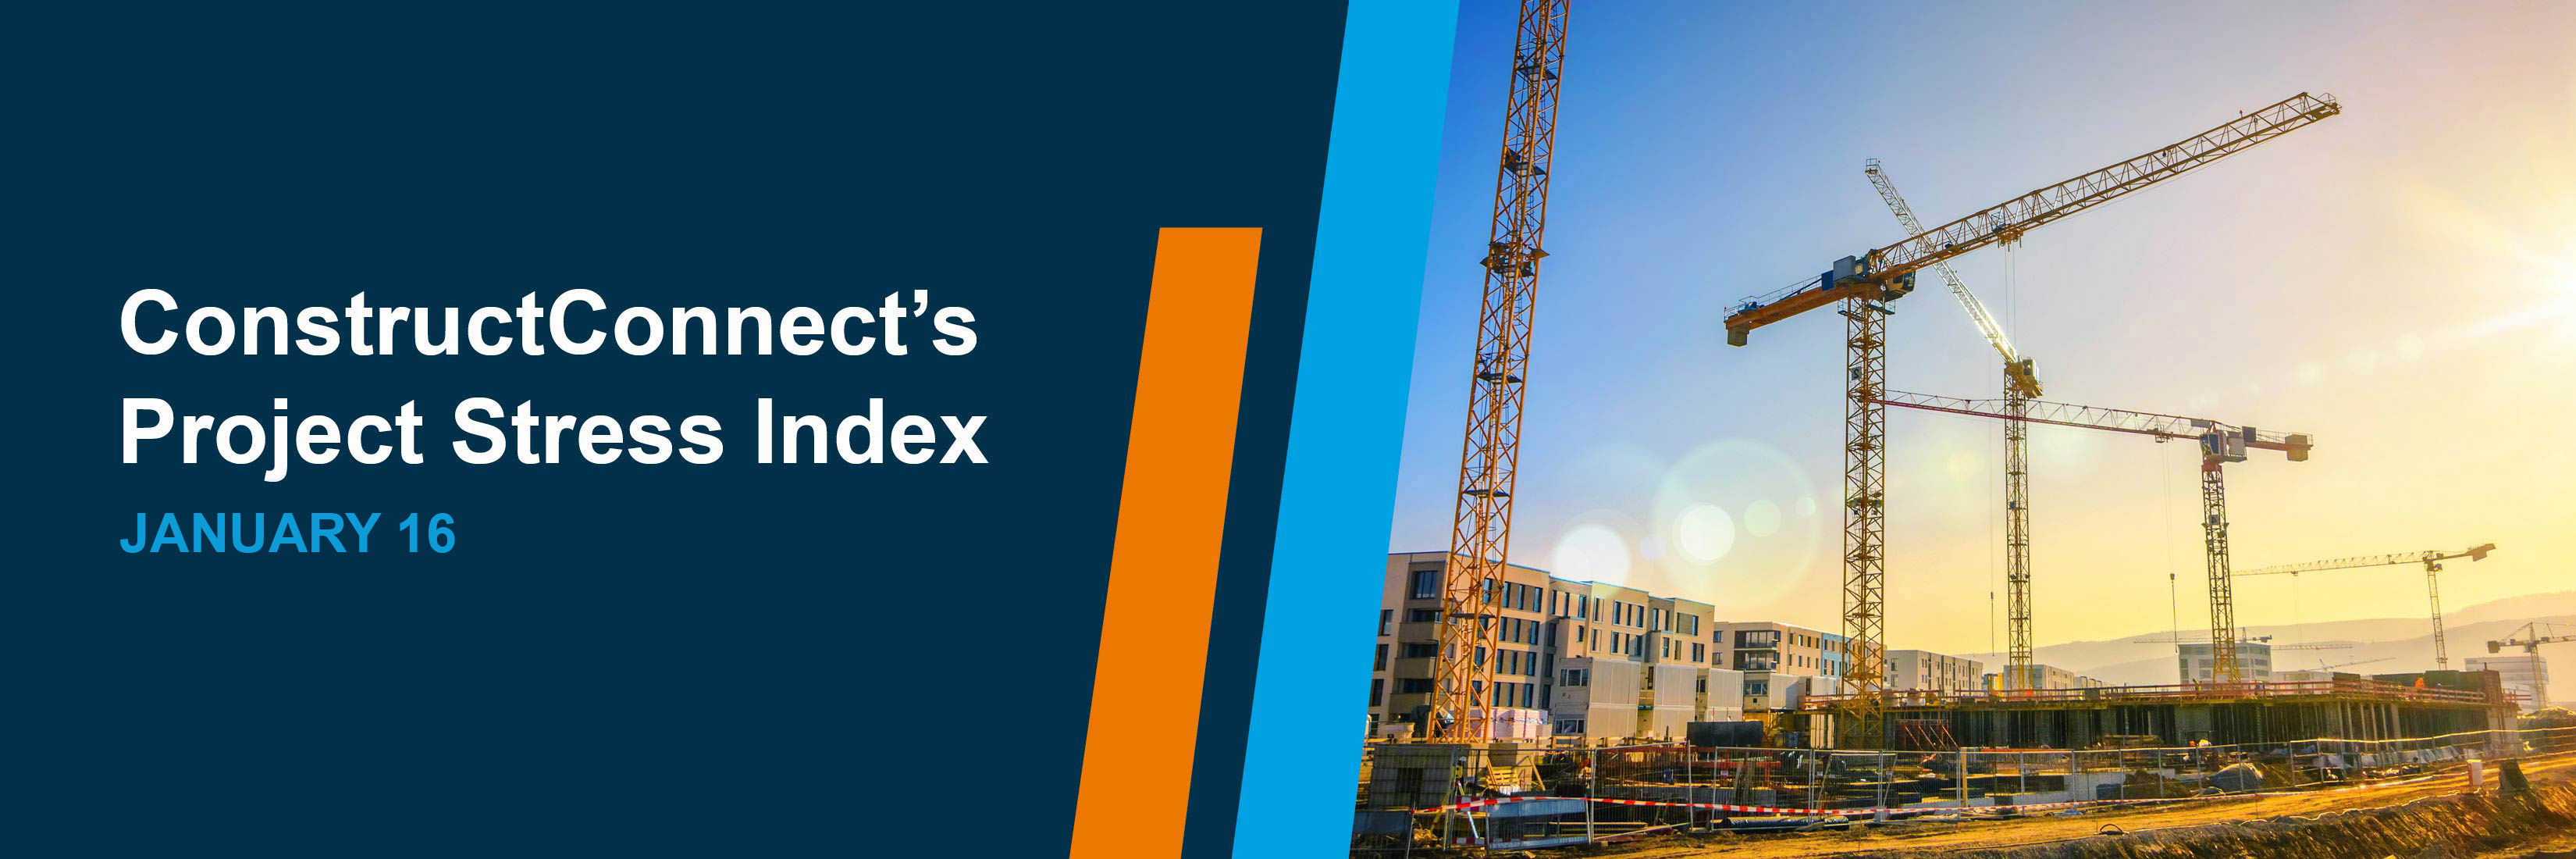 ConstructConnect's Project Stress Index - January 16